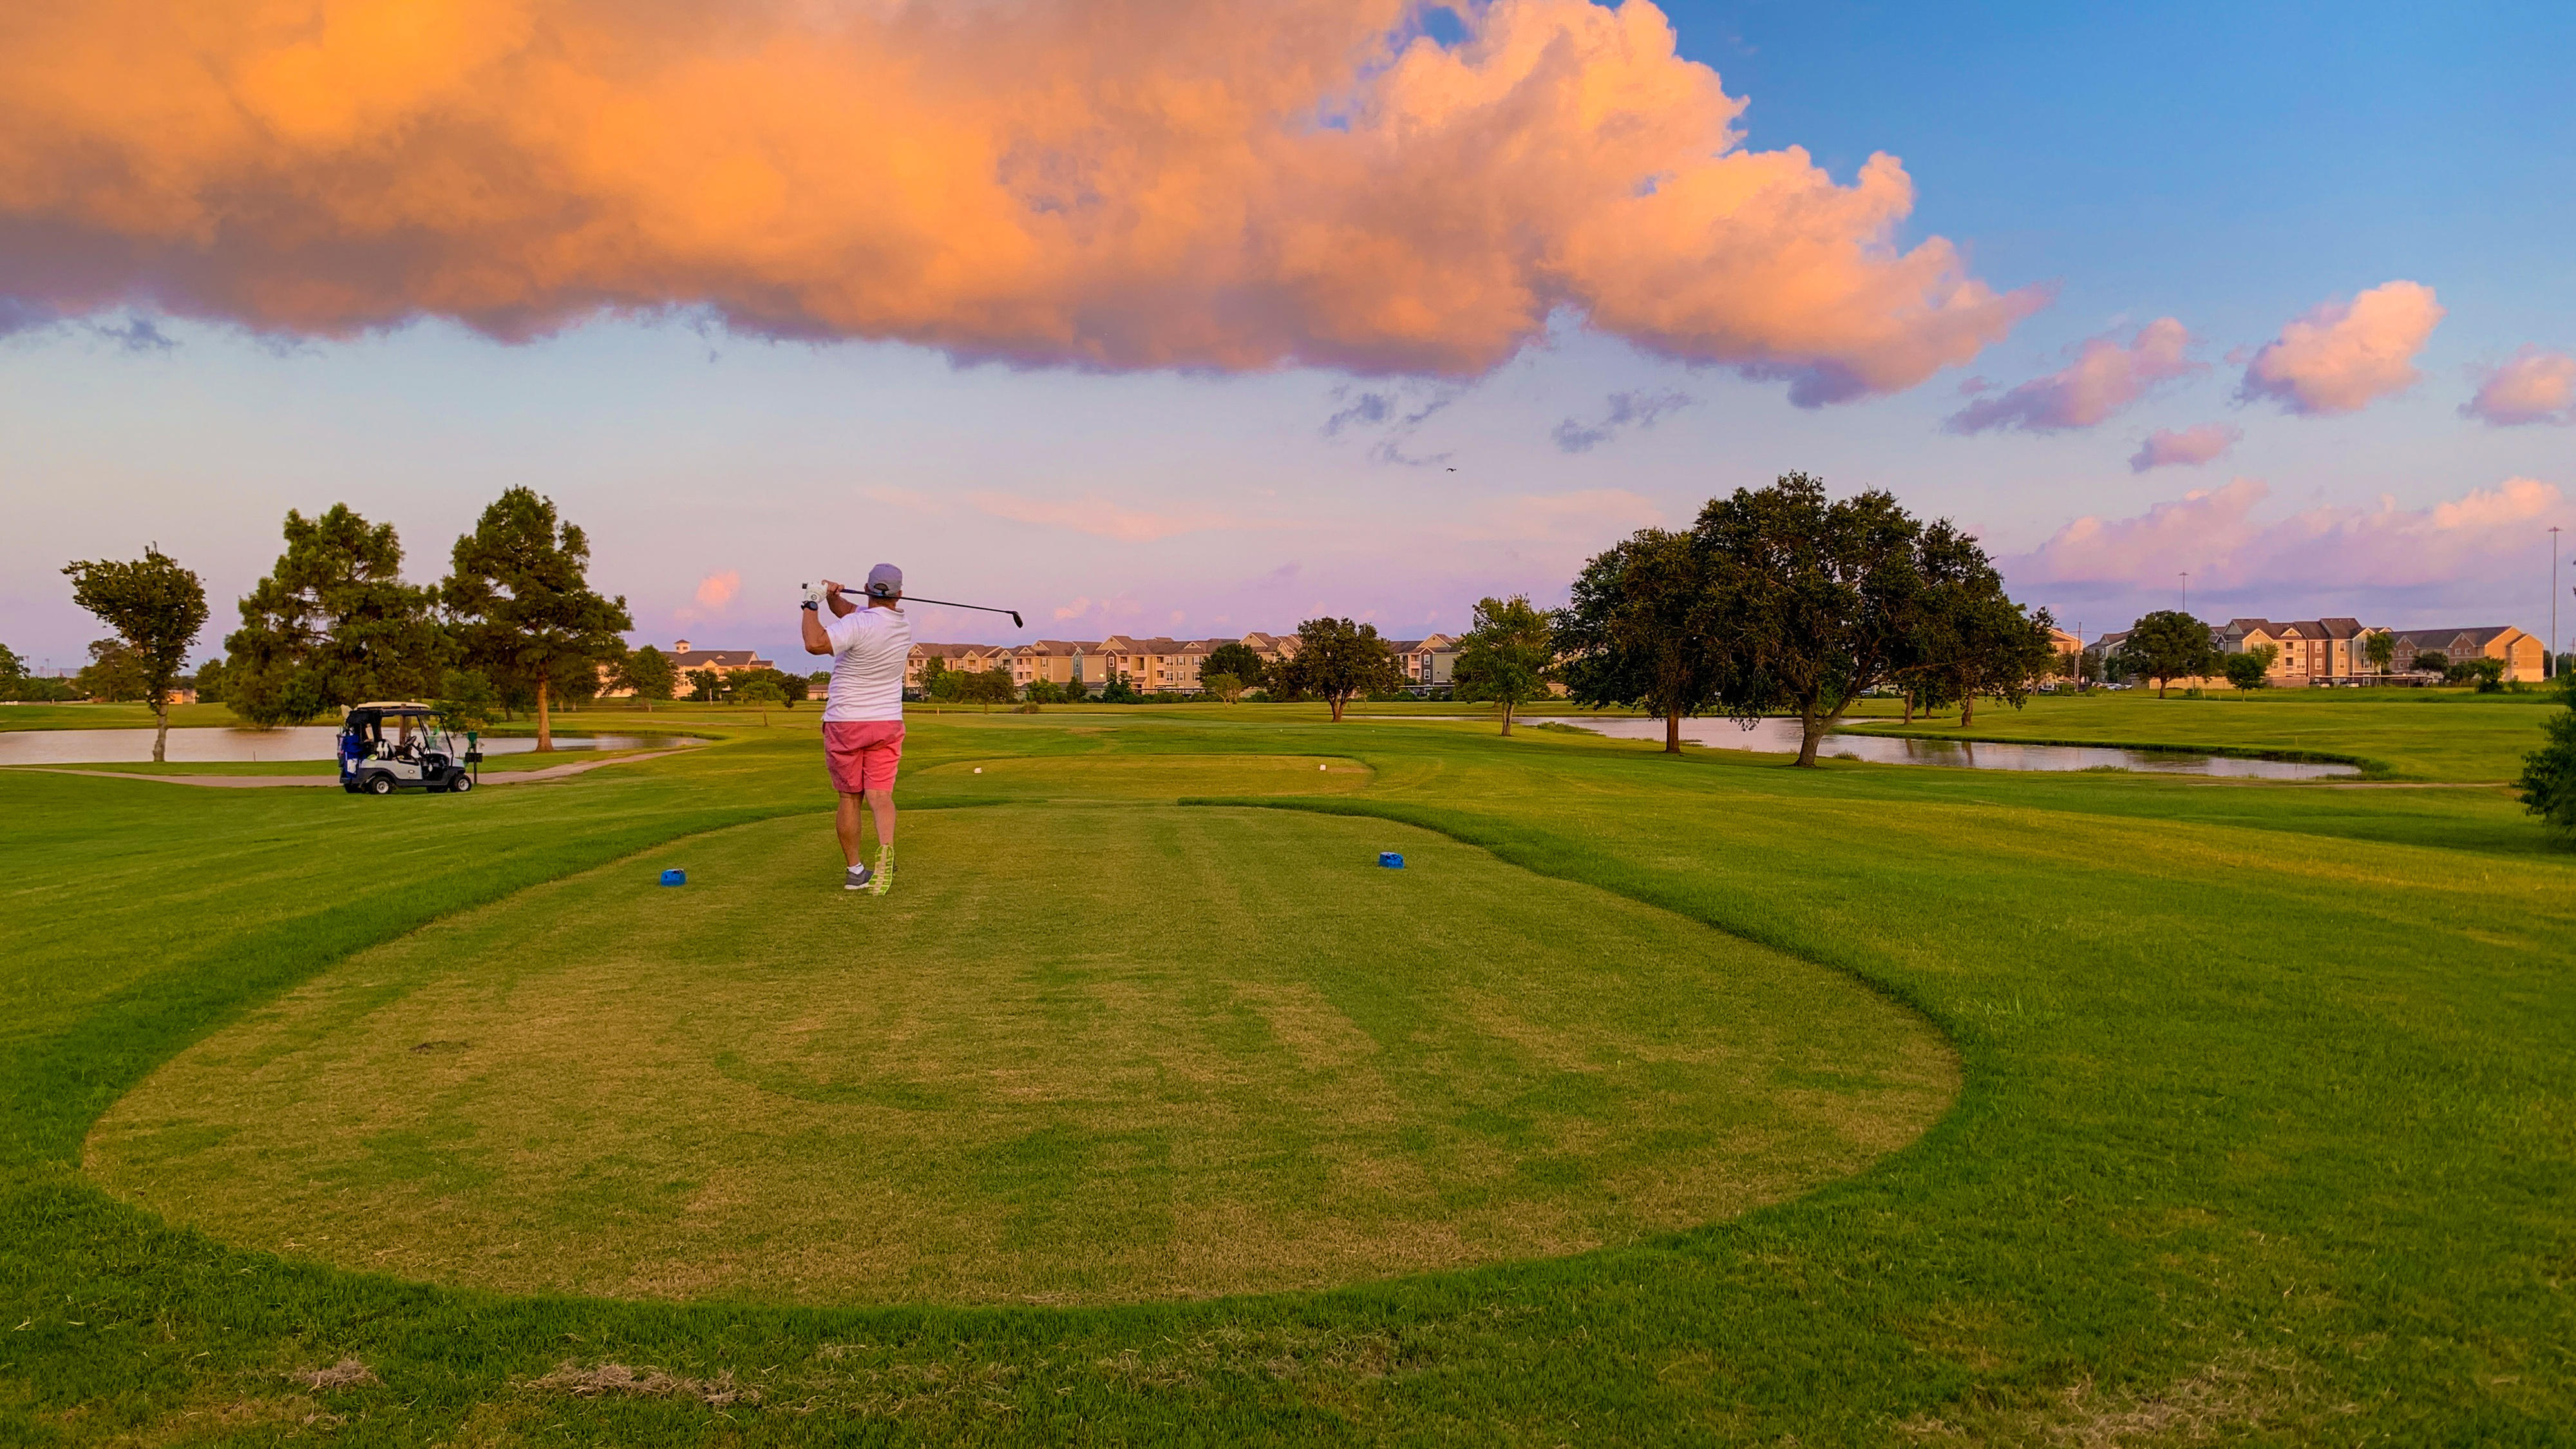 man swings a golf club at sunset at the Babe Zaharias golf course in Port Arthur, Texas